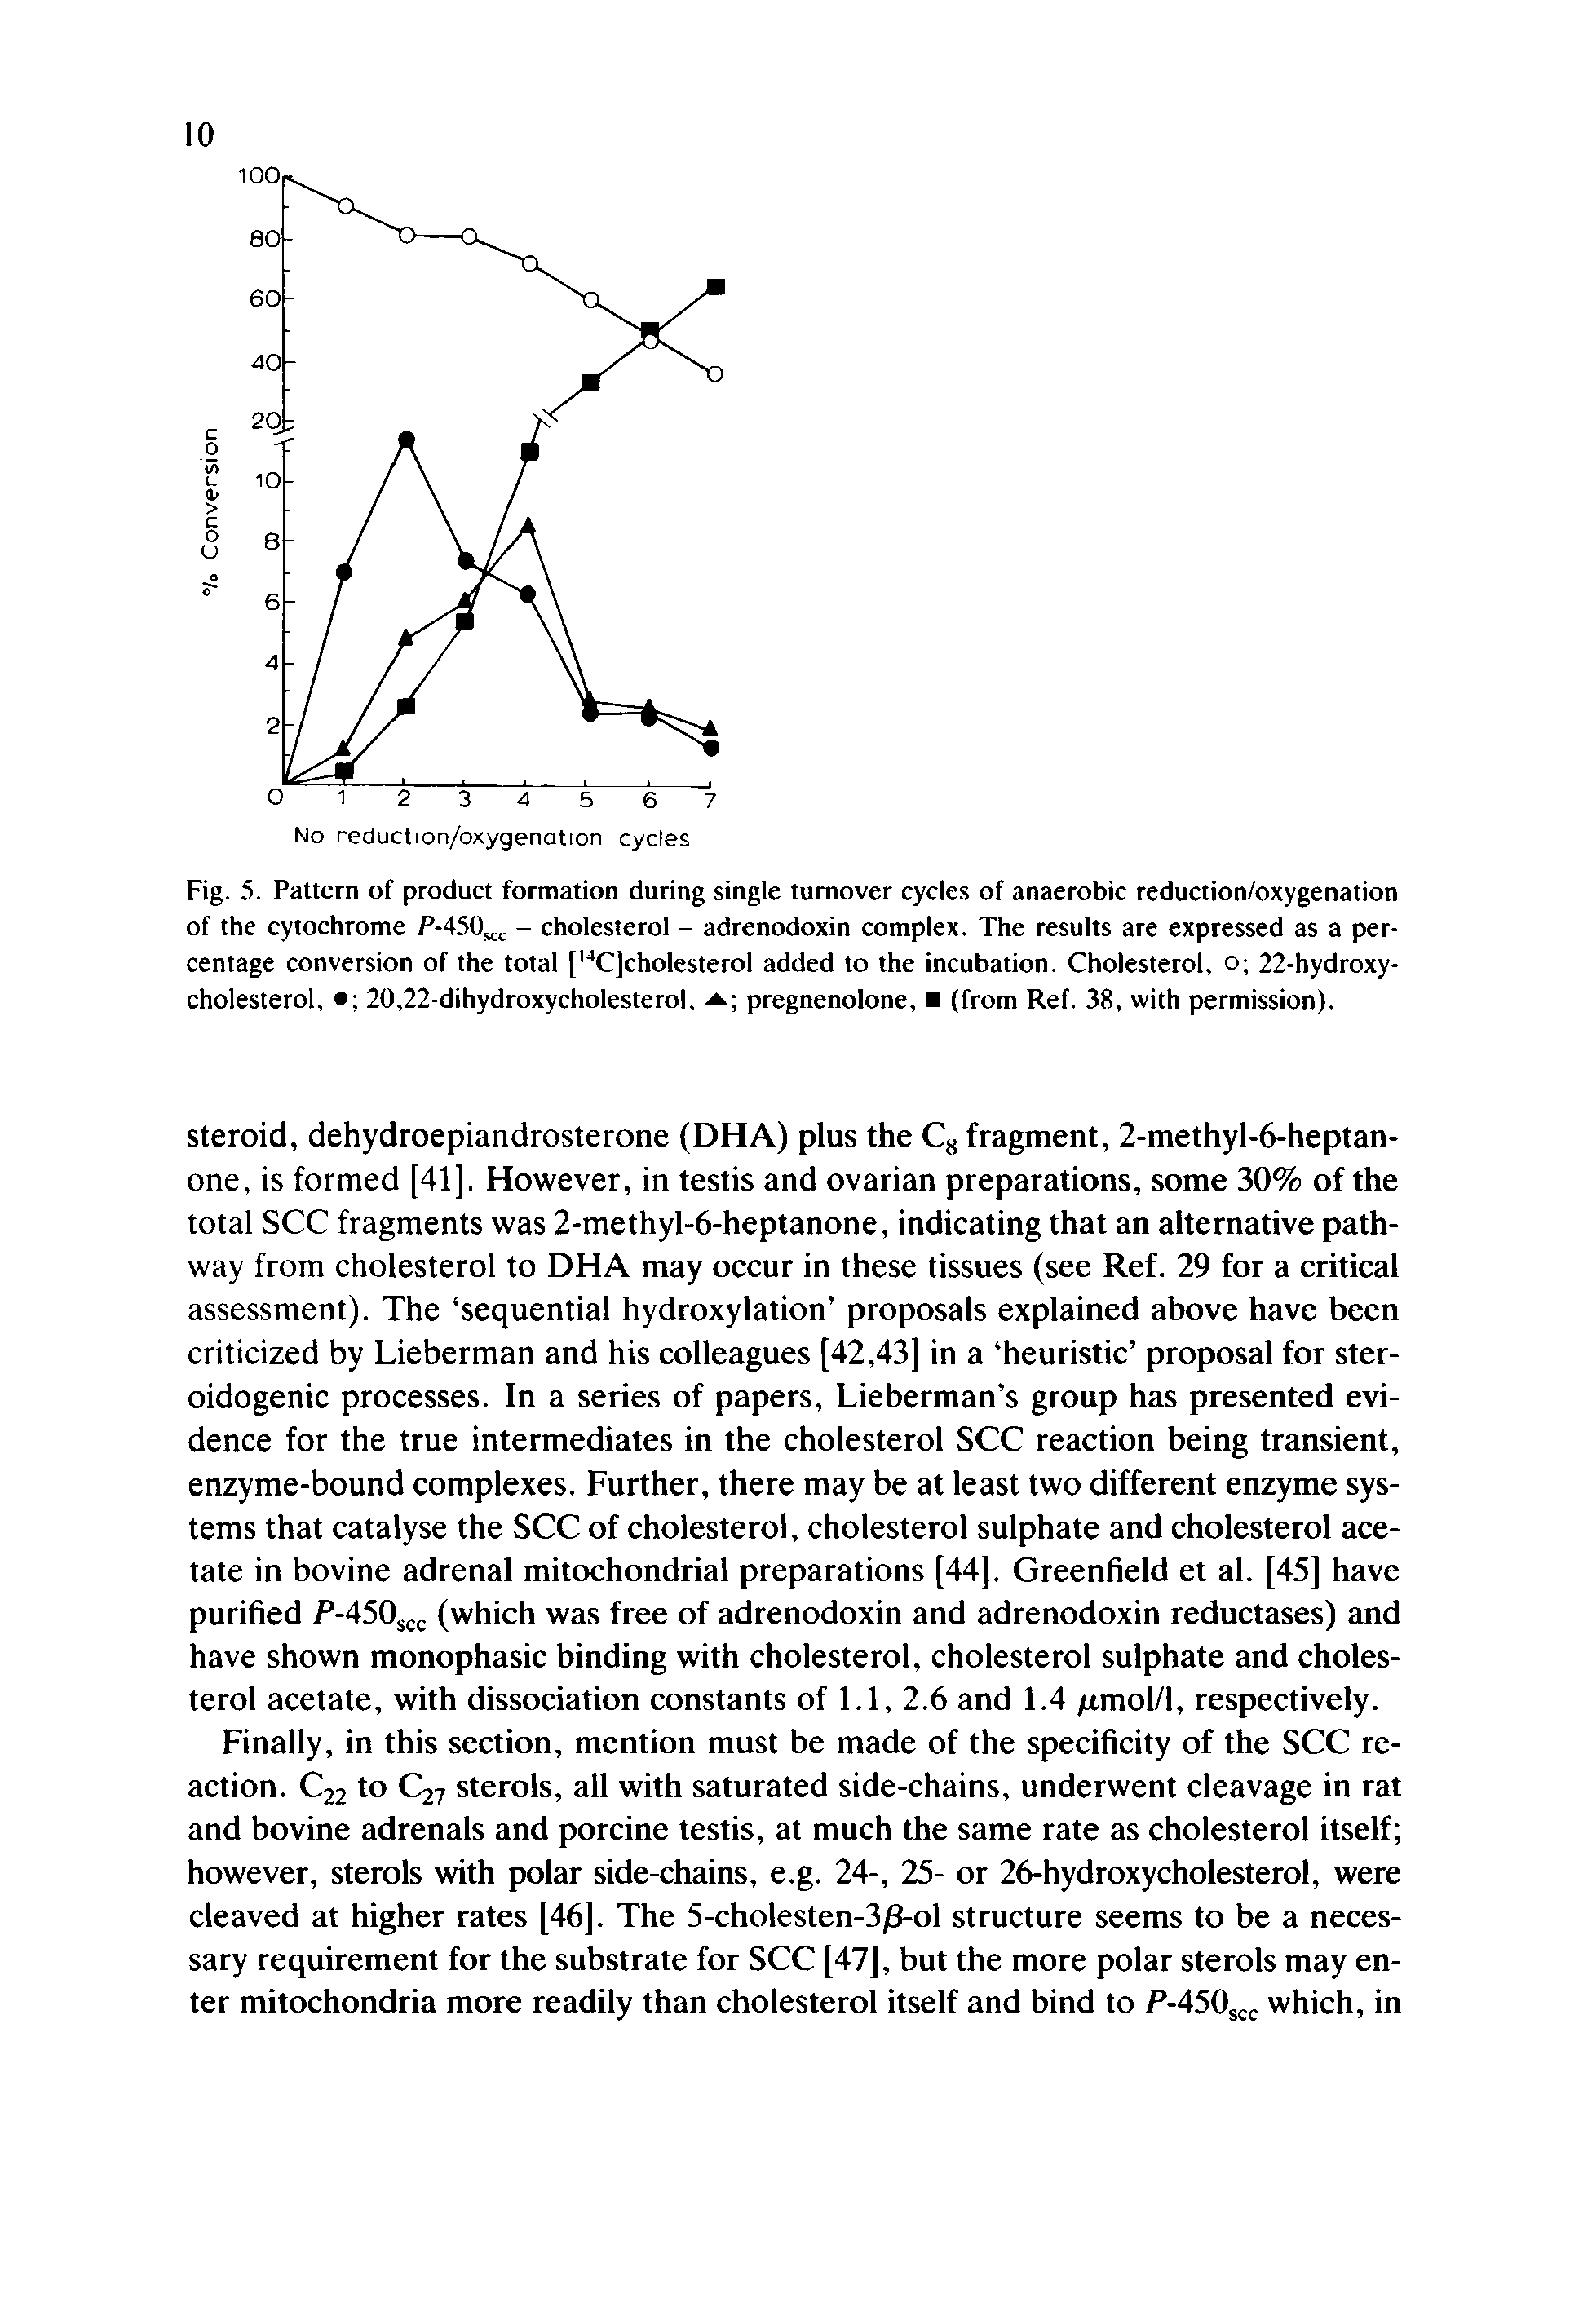 Fig. 5. Pattern of product formation during single turnover cycles of anaerobic reduction/oxygenation of the cytochrome P-450,.,. - cholesterol - adrenodoxin complex. The results are expressed as a percentage conversion of the total [14C]cholesterol added to the incubation. Cholesterol, o 22-hydroxy-cholesterol, 20,22-dihydroxycholesterol. a pregnenolone, (from Ref. 38, with permission).